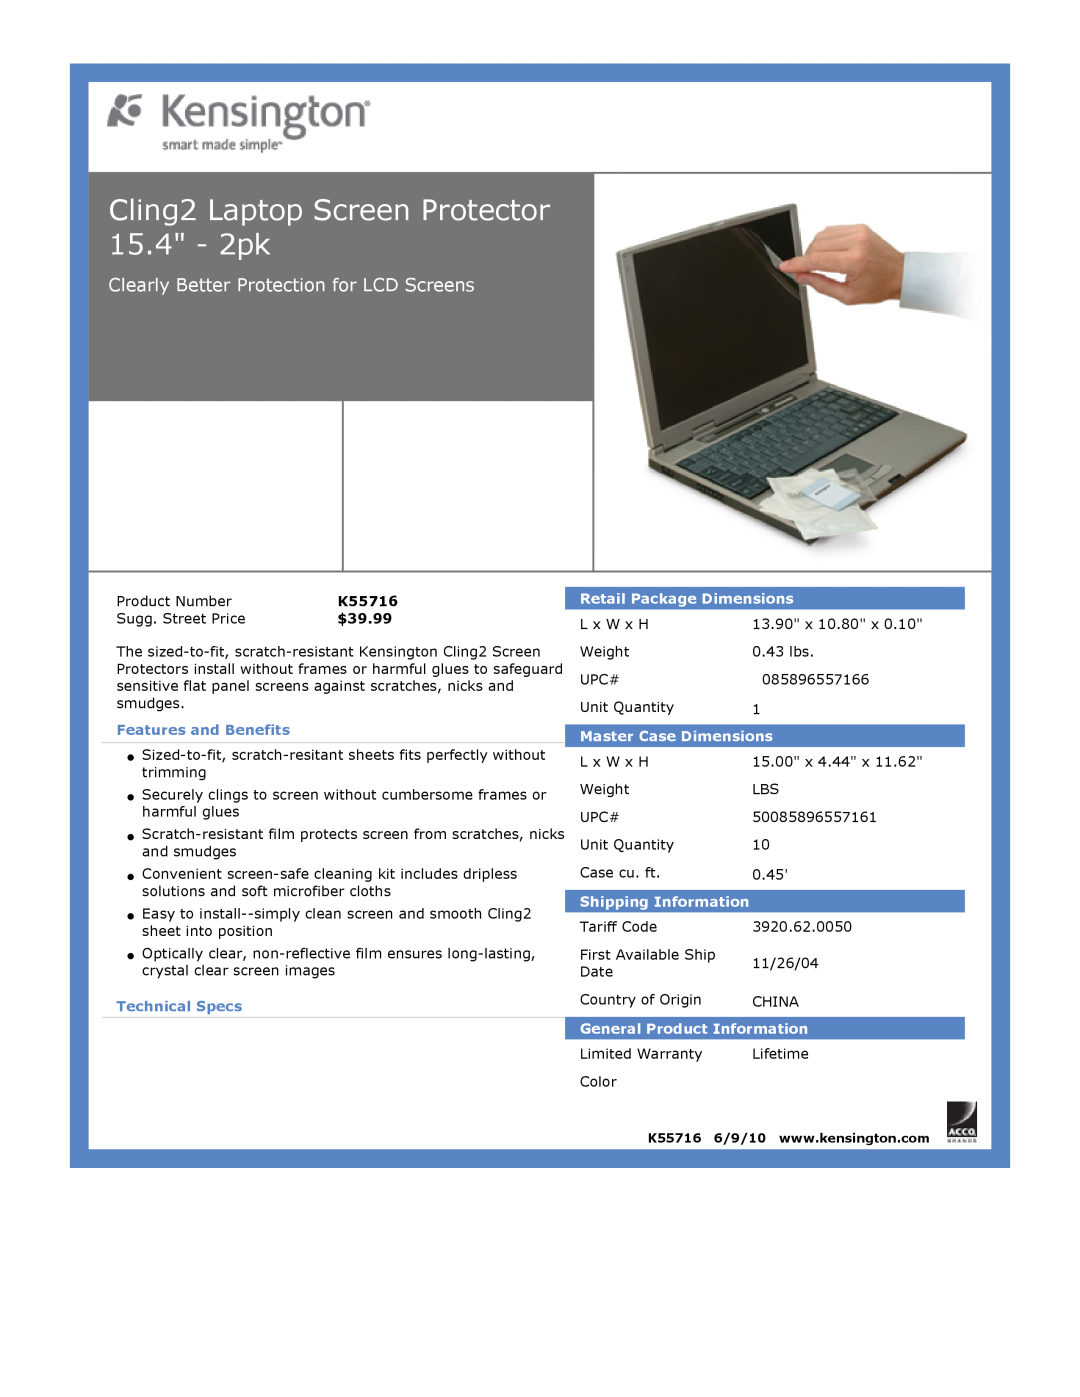 Kensington EU64325 dimensions Cling2 Laptop Screen Protector 15.4 - 2pk, Clearly Better Protection for LCD Screens, $39.99 